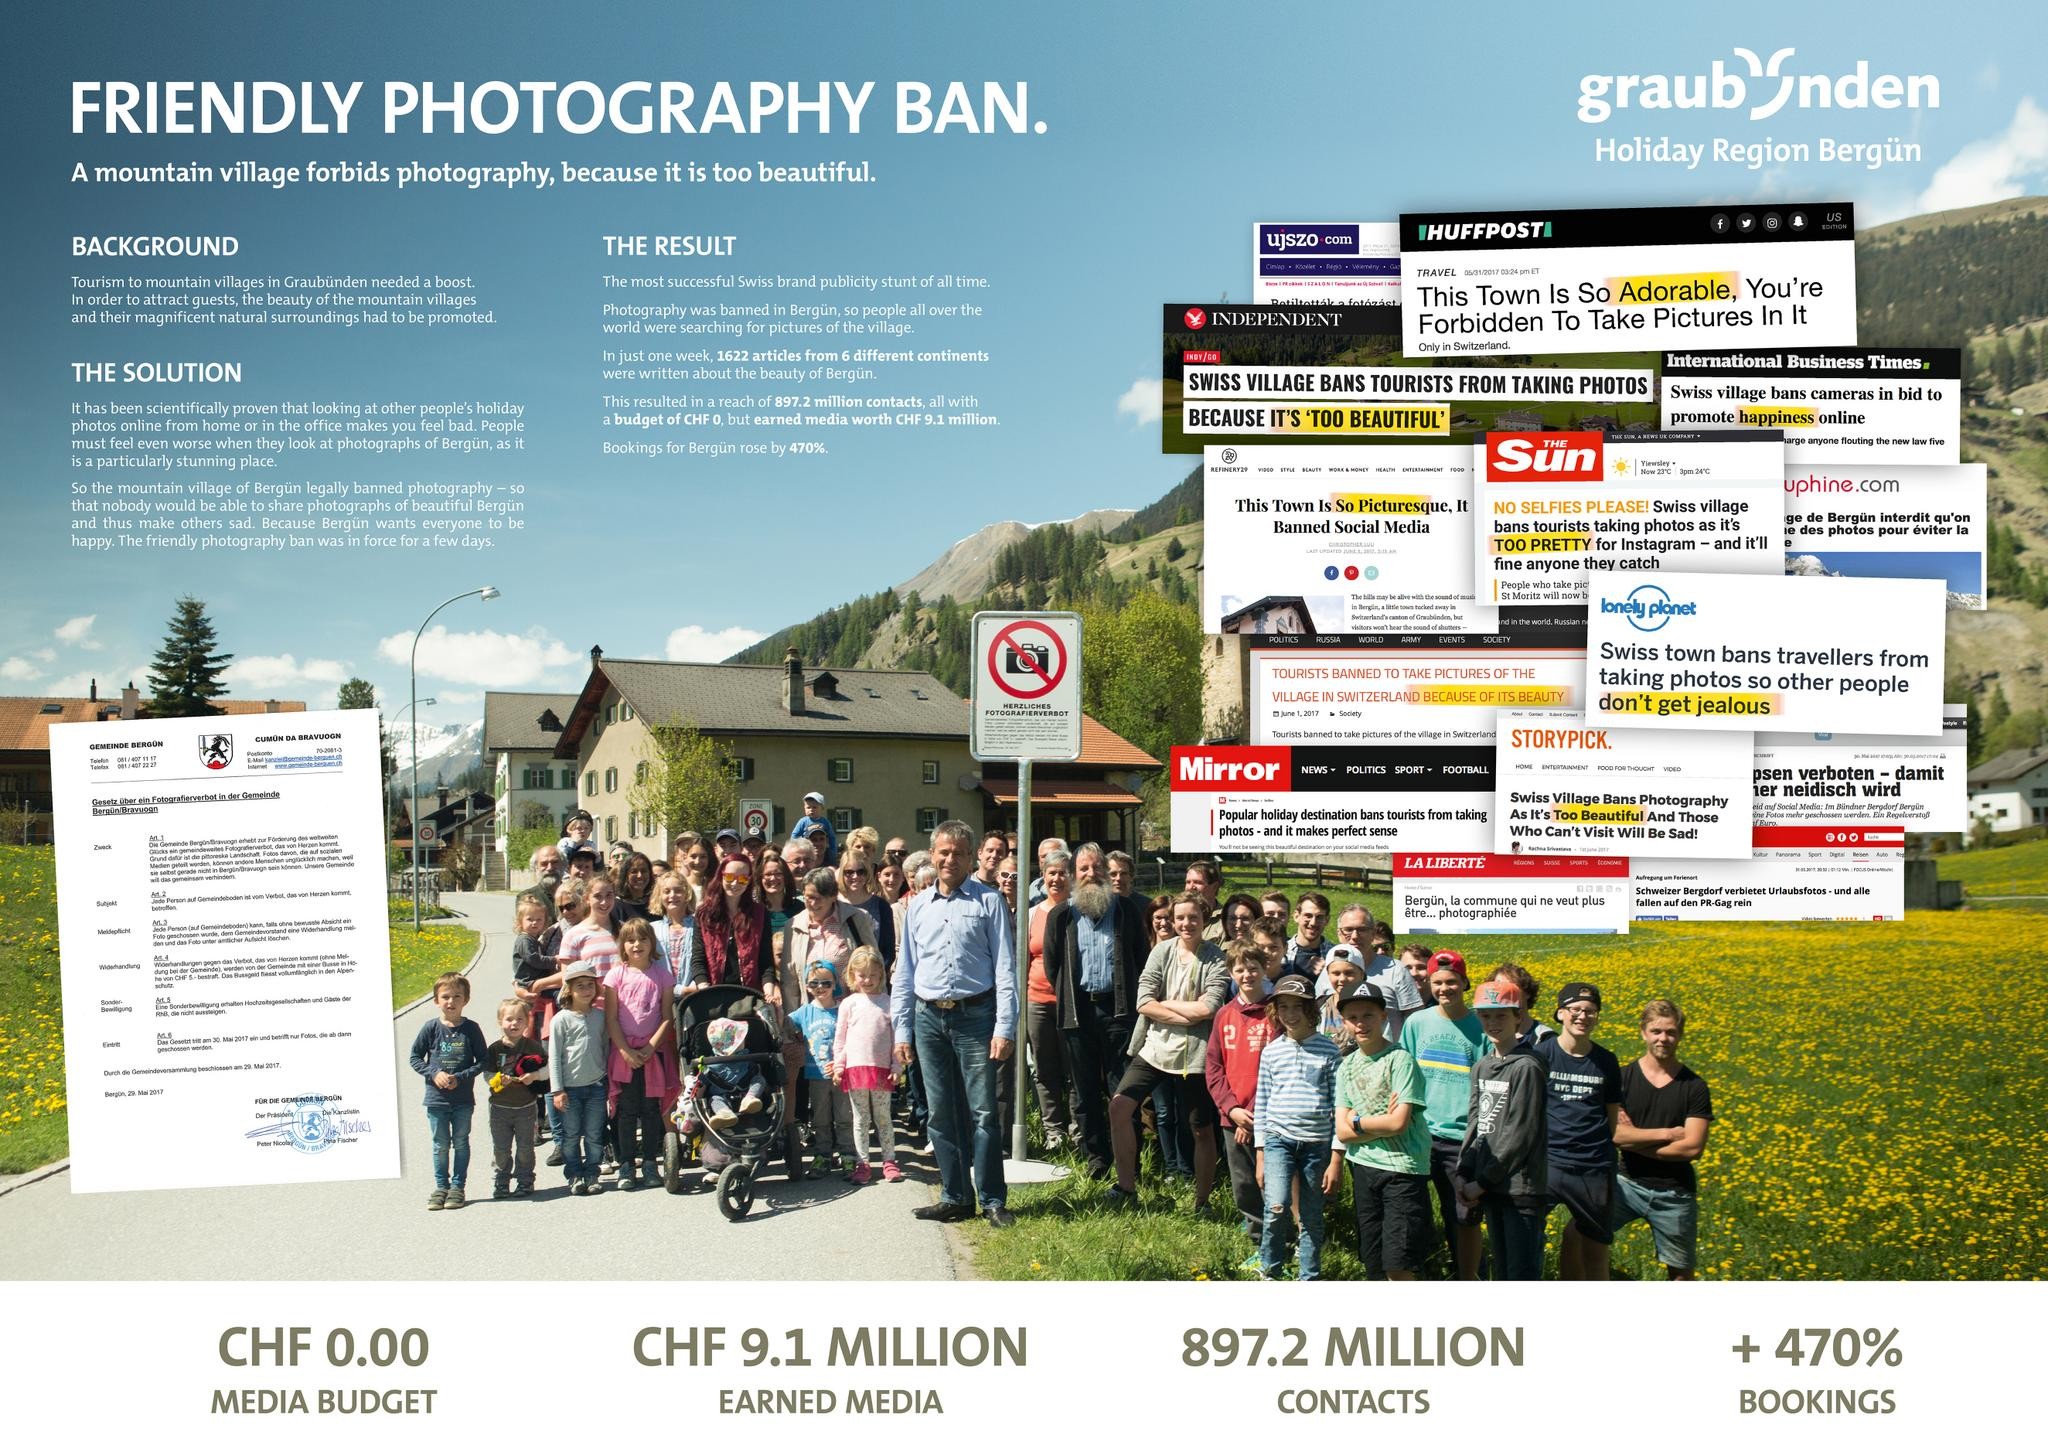 The Photography Ban